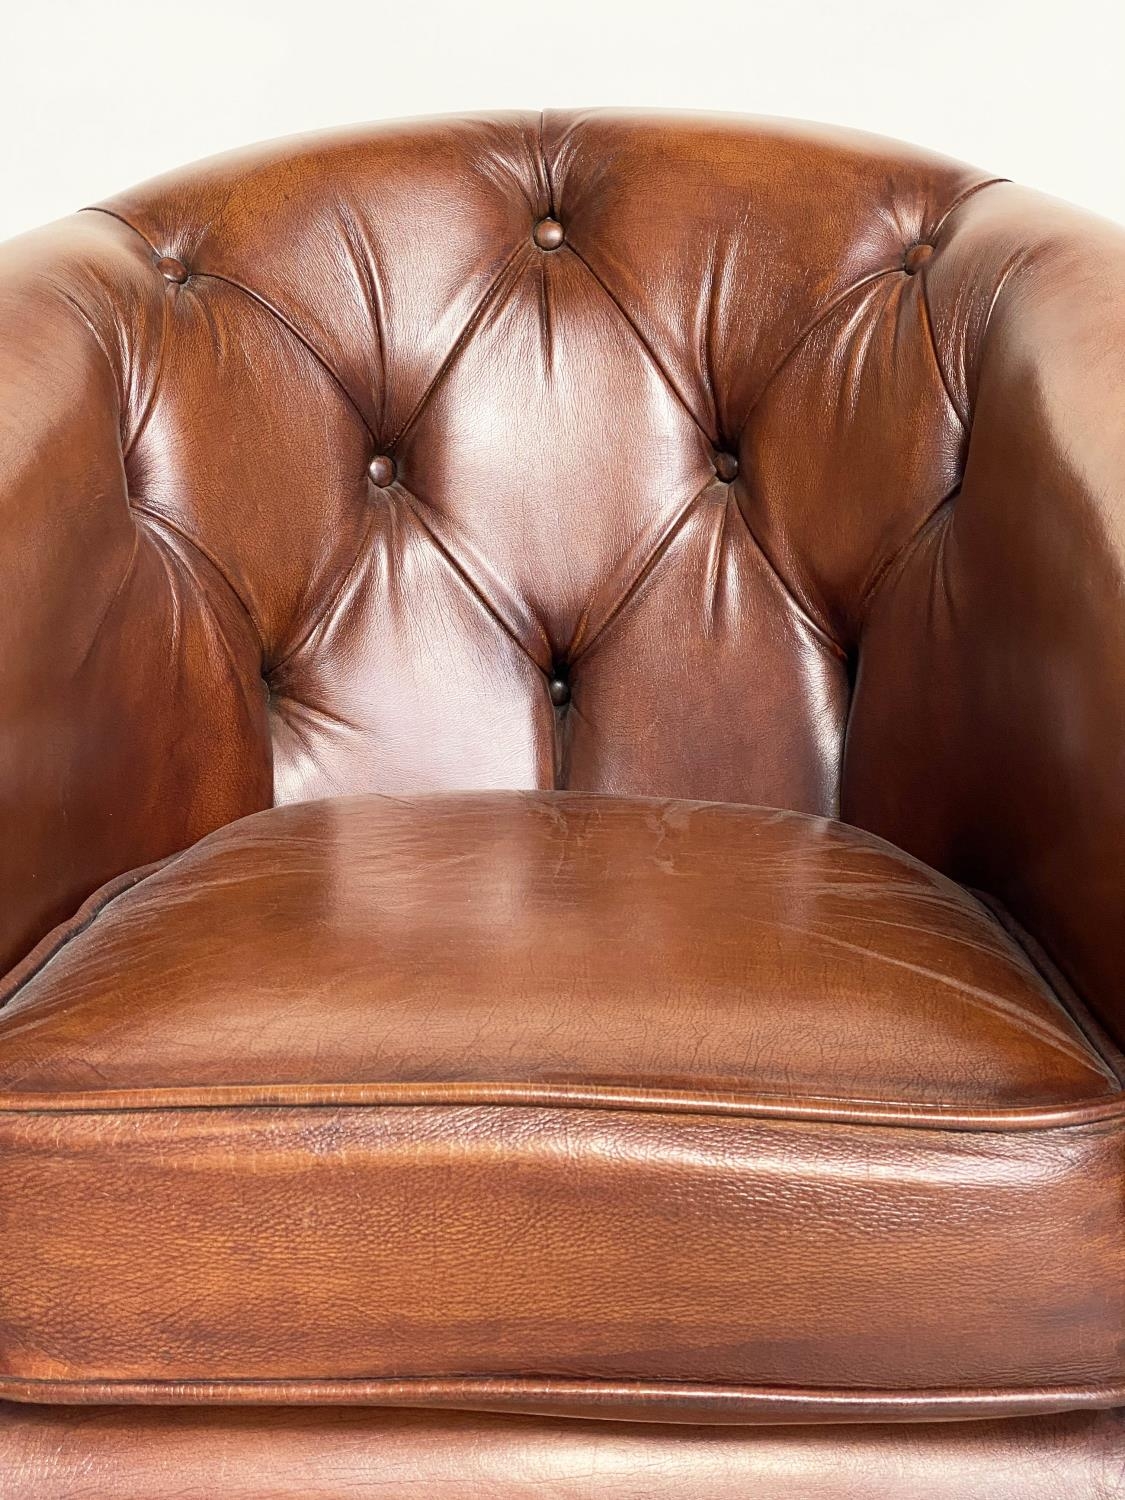 TUB ARMCHAIR BY THOMAS LLOYD, buttoned tan leather with arched back and rounded arms, 78cm W. - Image 6 of 6